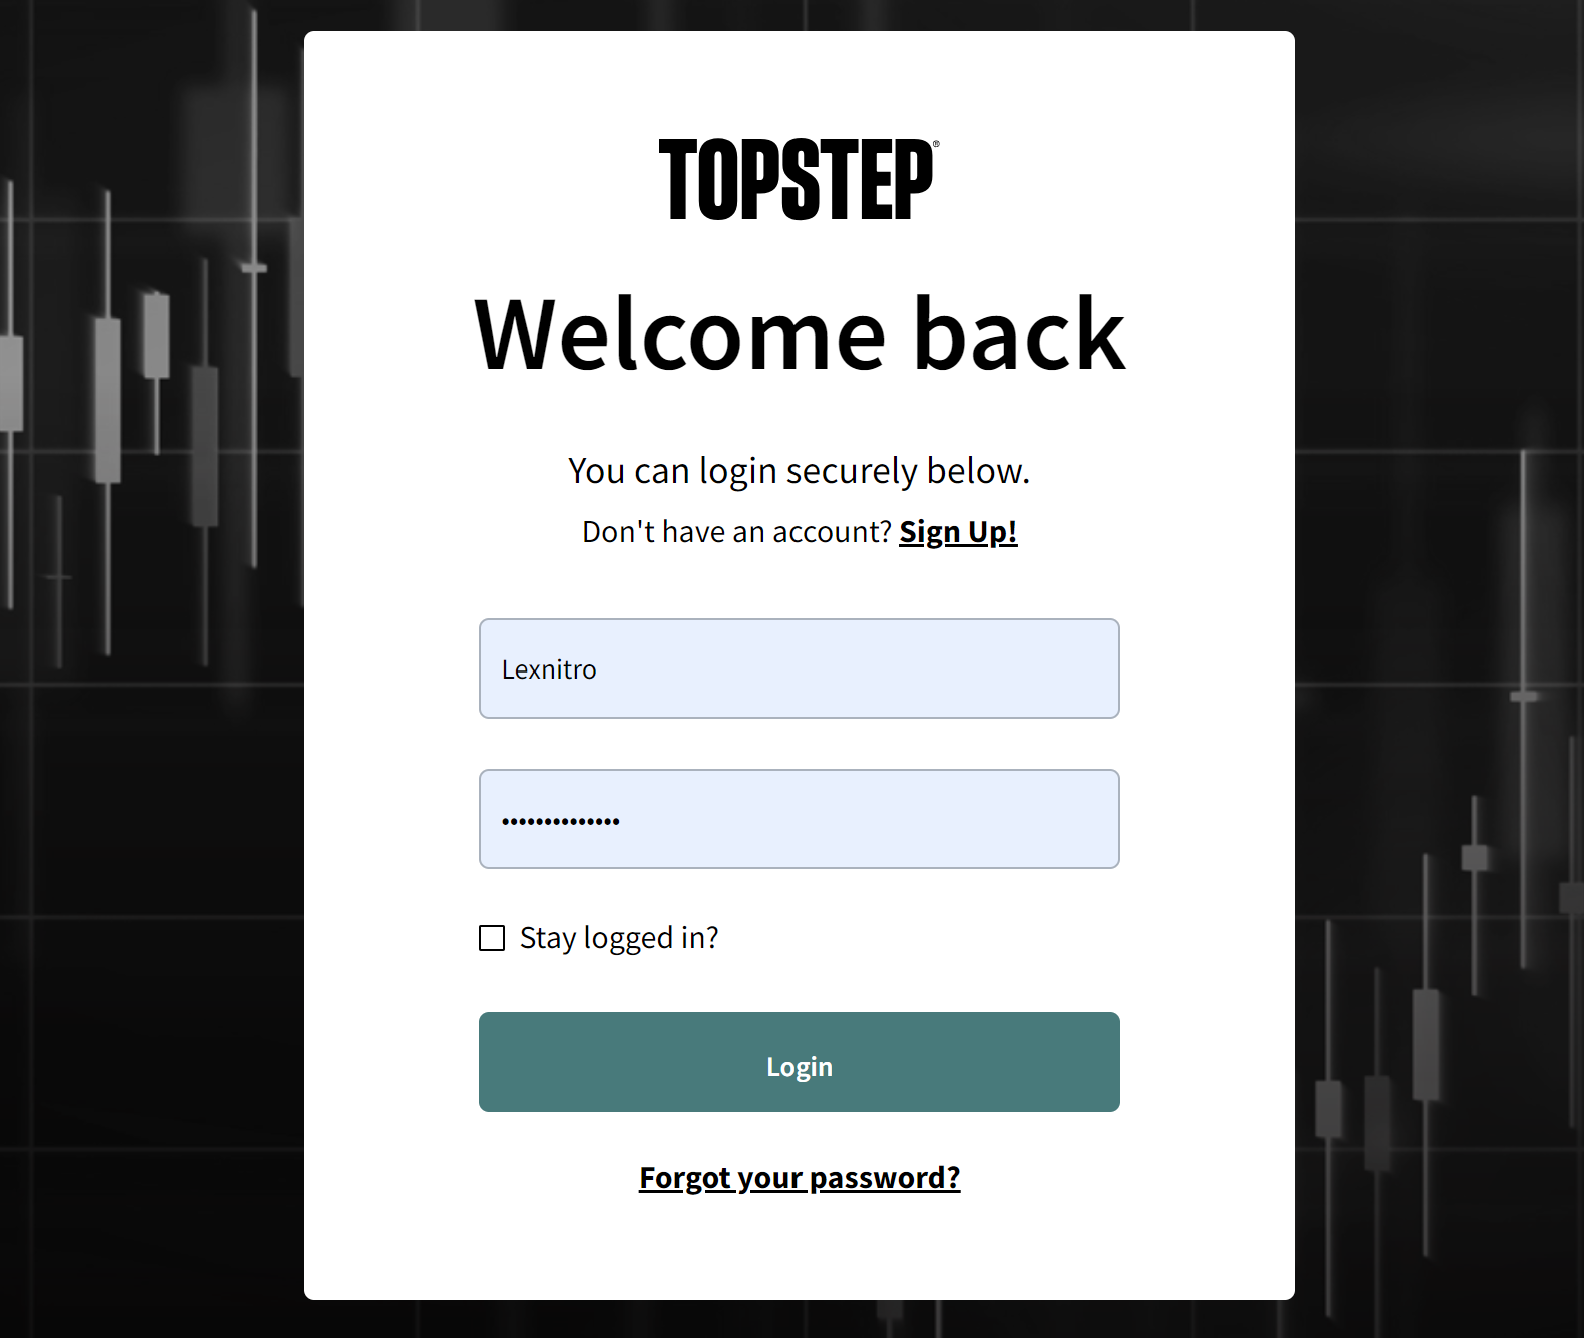 How to connect a Topstep-funded account to TradingView